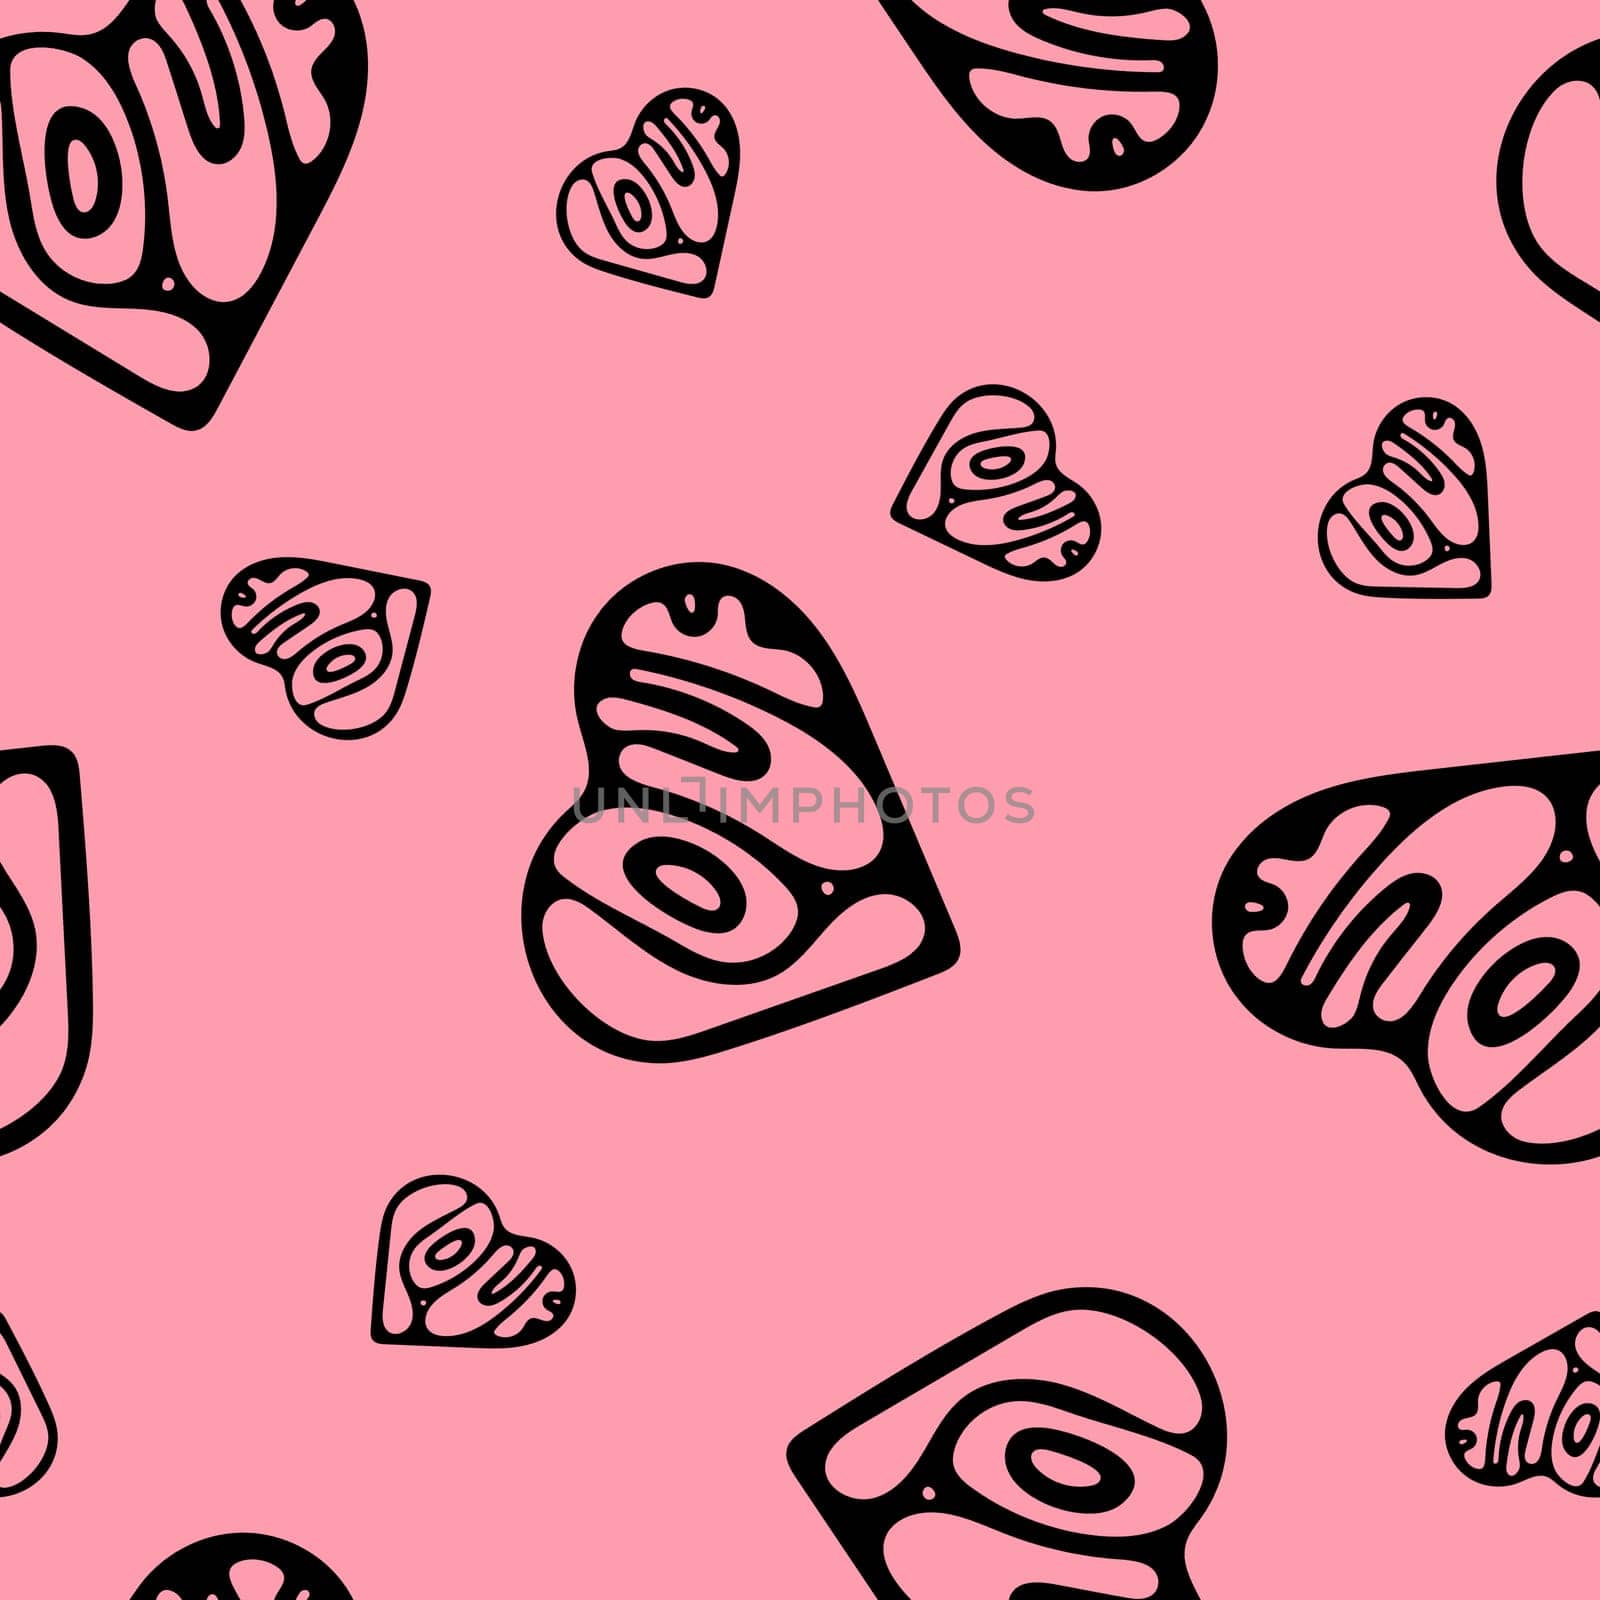 Hand Drawn Seamless Patterns with Hearts in Doodle Style. Romantic Love Digital Paper for Valentines Day. Black Hearts on Pale Pink Background.